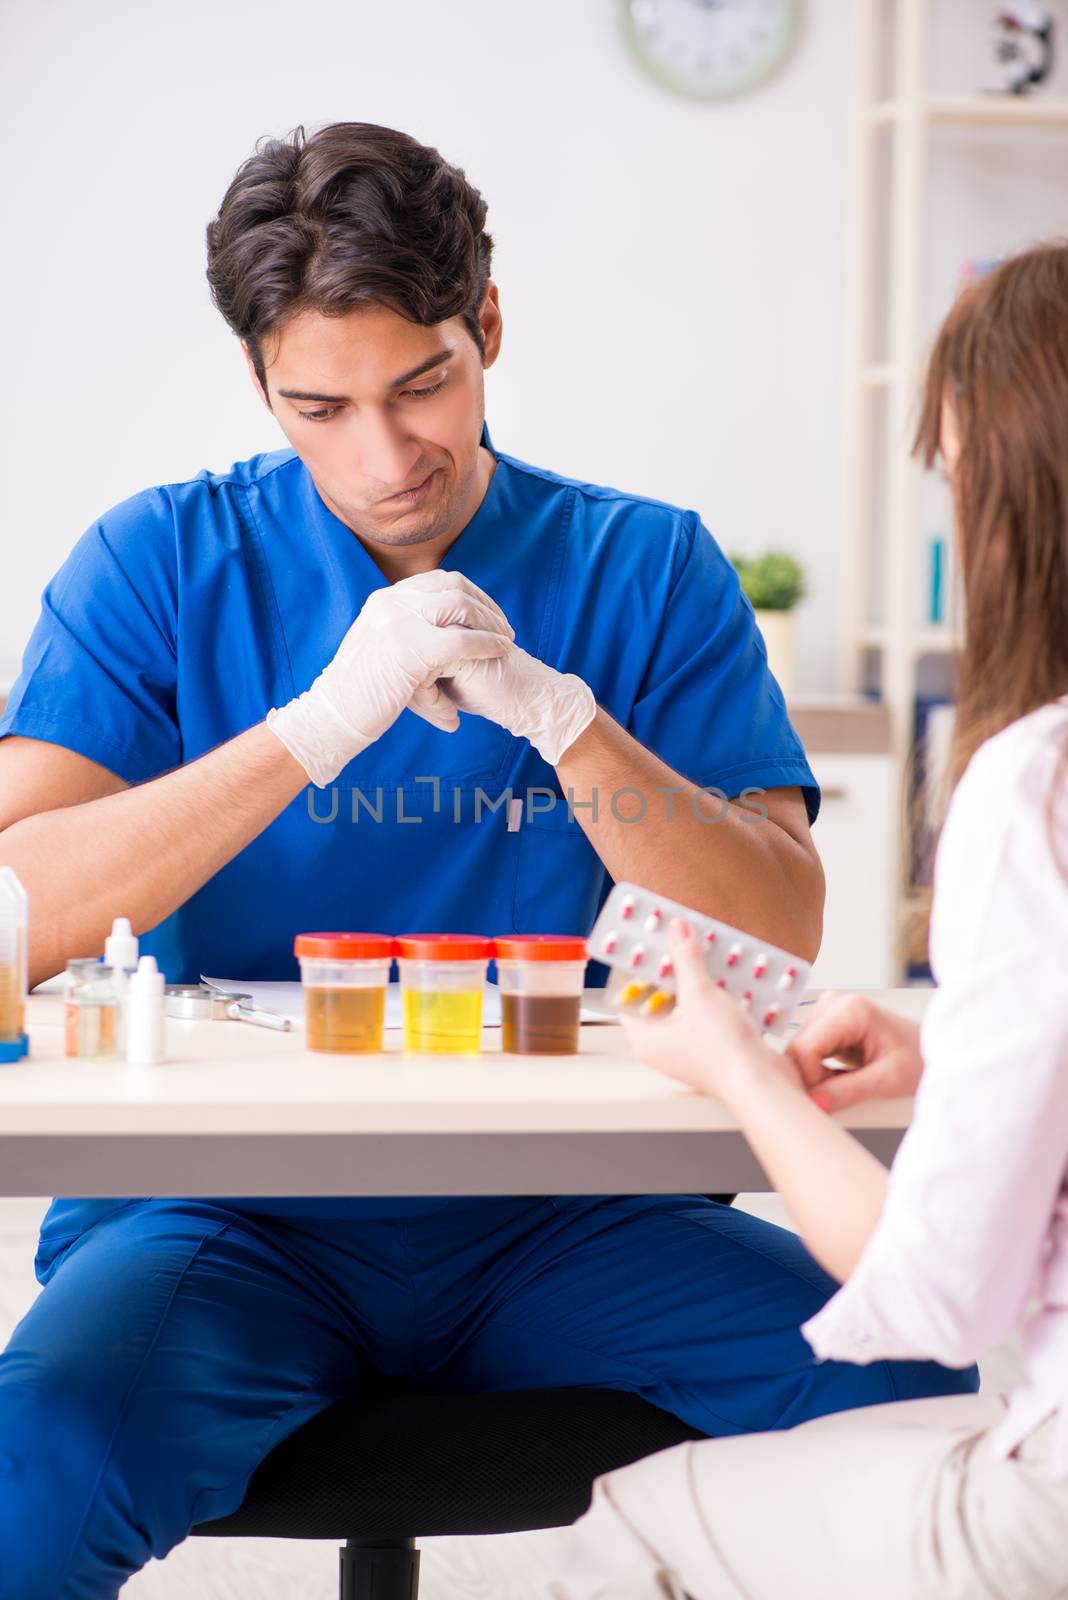 Patient visiting doctor for urine test by Elnur